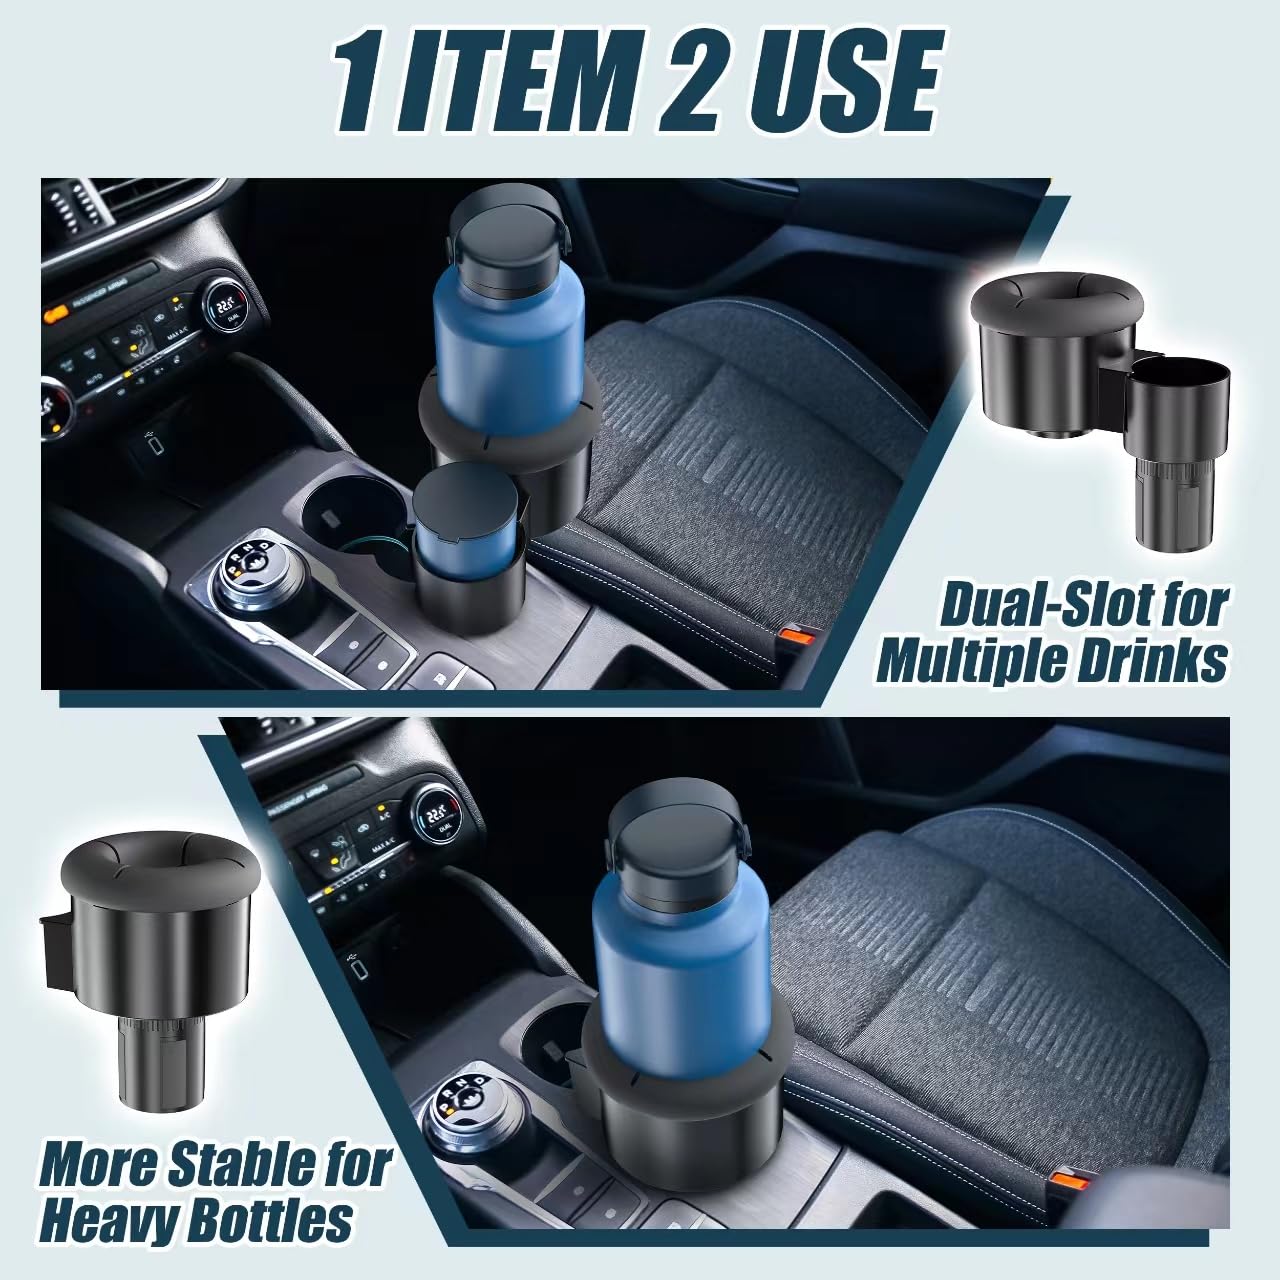 Paffenery Configurable Dual Cup Holder Extender for Car, 2-in-1 Extra Large Car Cup Holder Expander, Universal Fit Expandable Car Cup Holder Adapter for Water Bottle, Compatible for Hydro Flask, Yeti